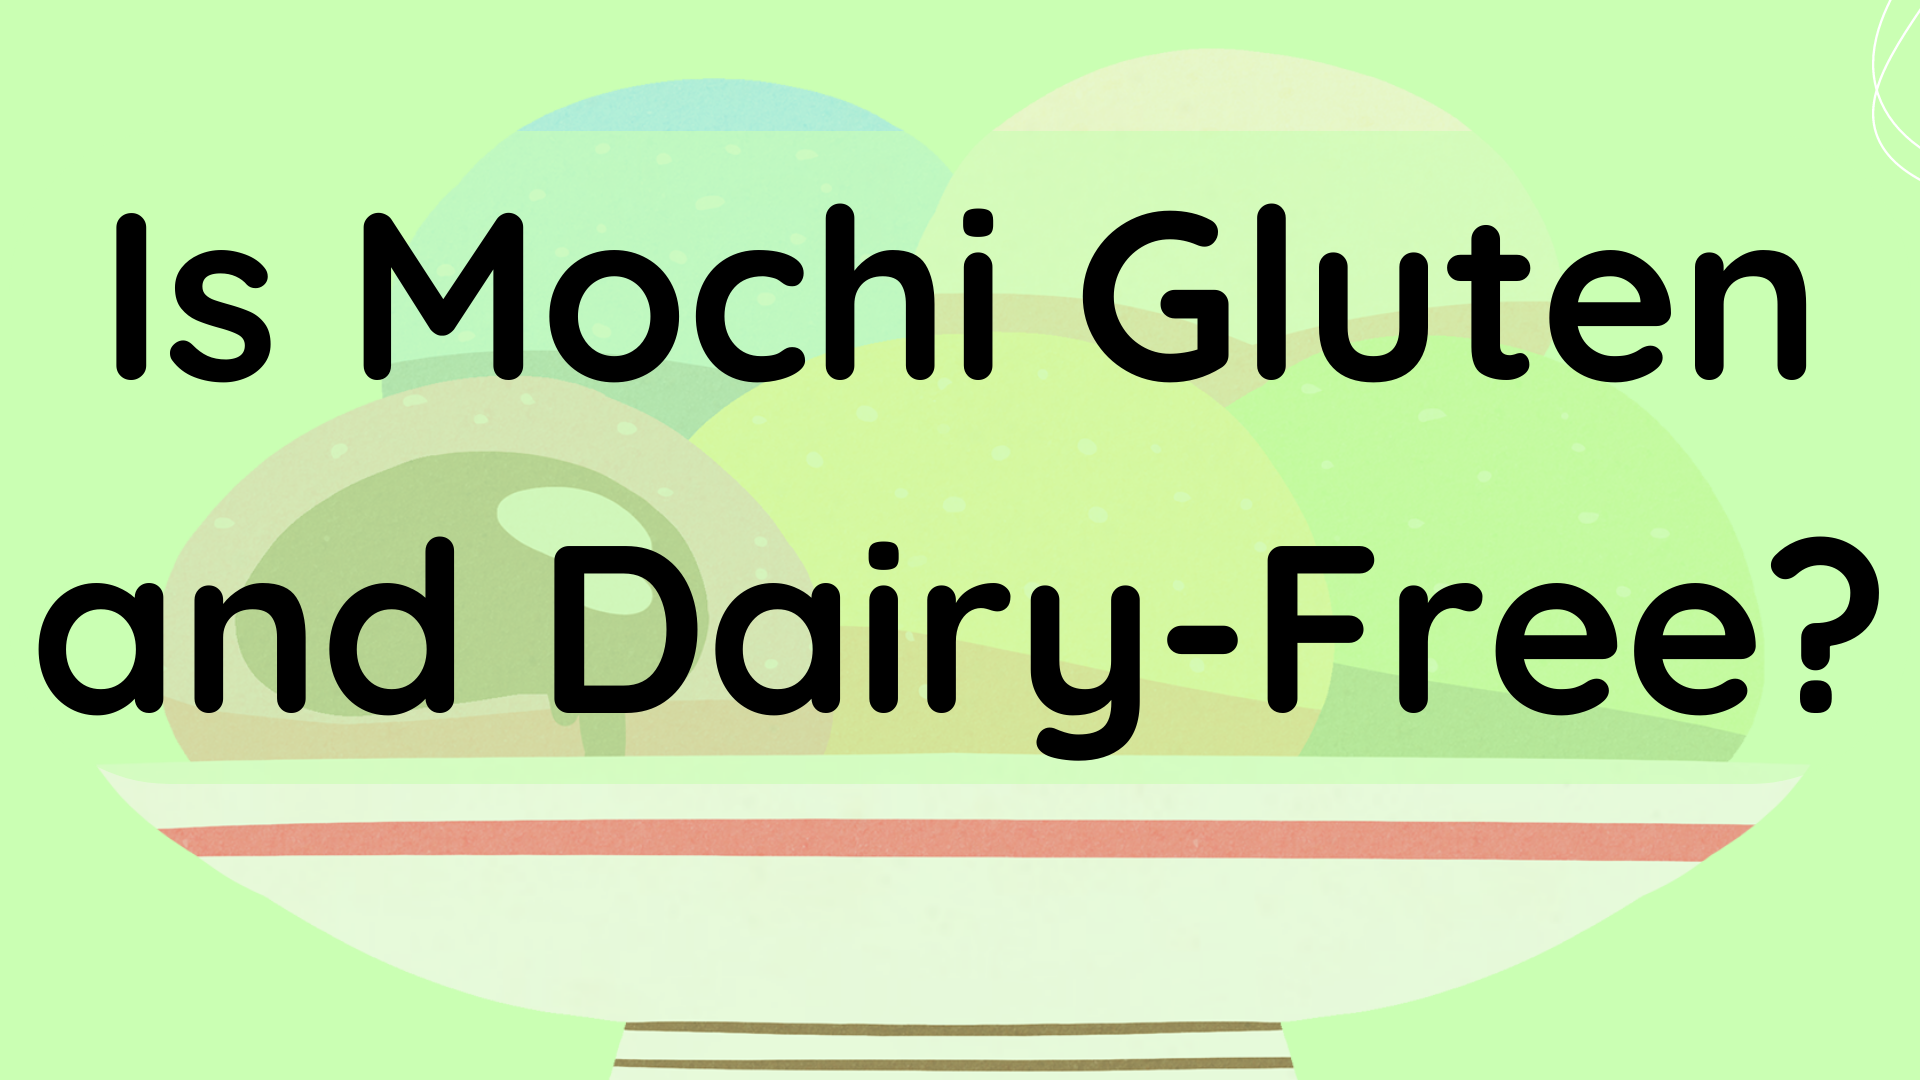 Is Mochi Gluten and Dairy-Free?